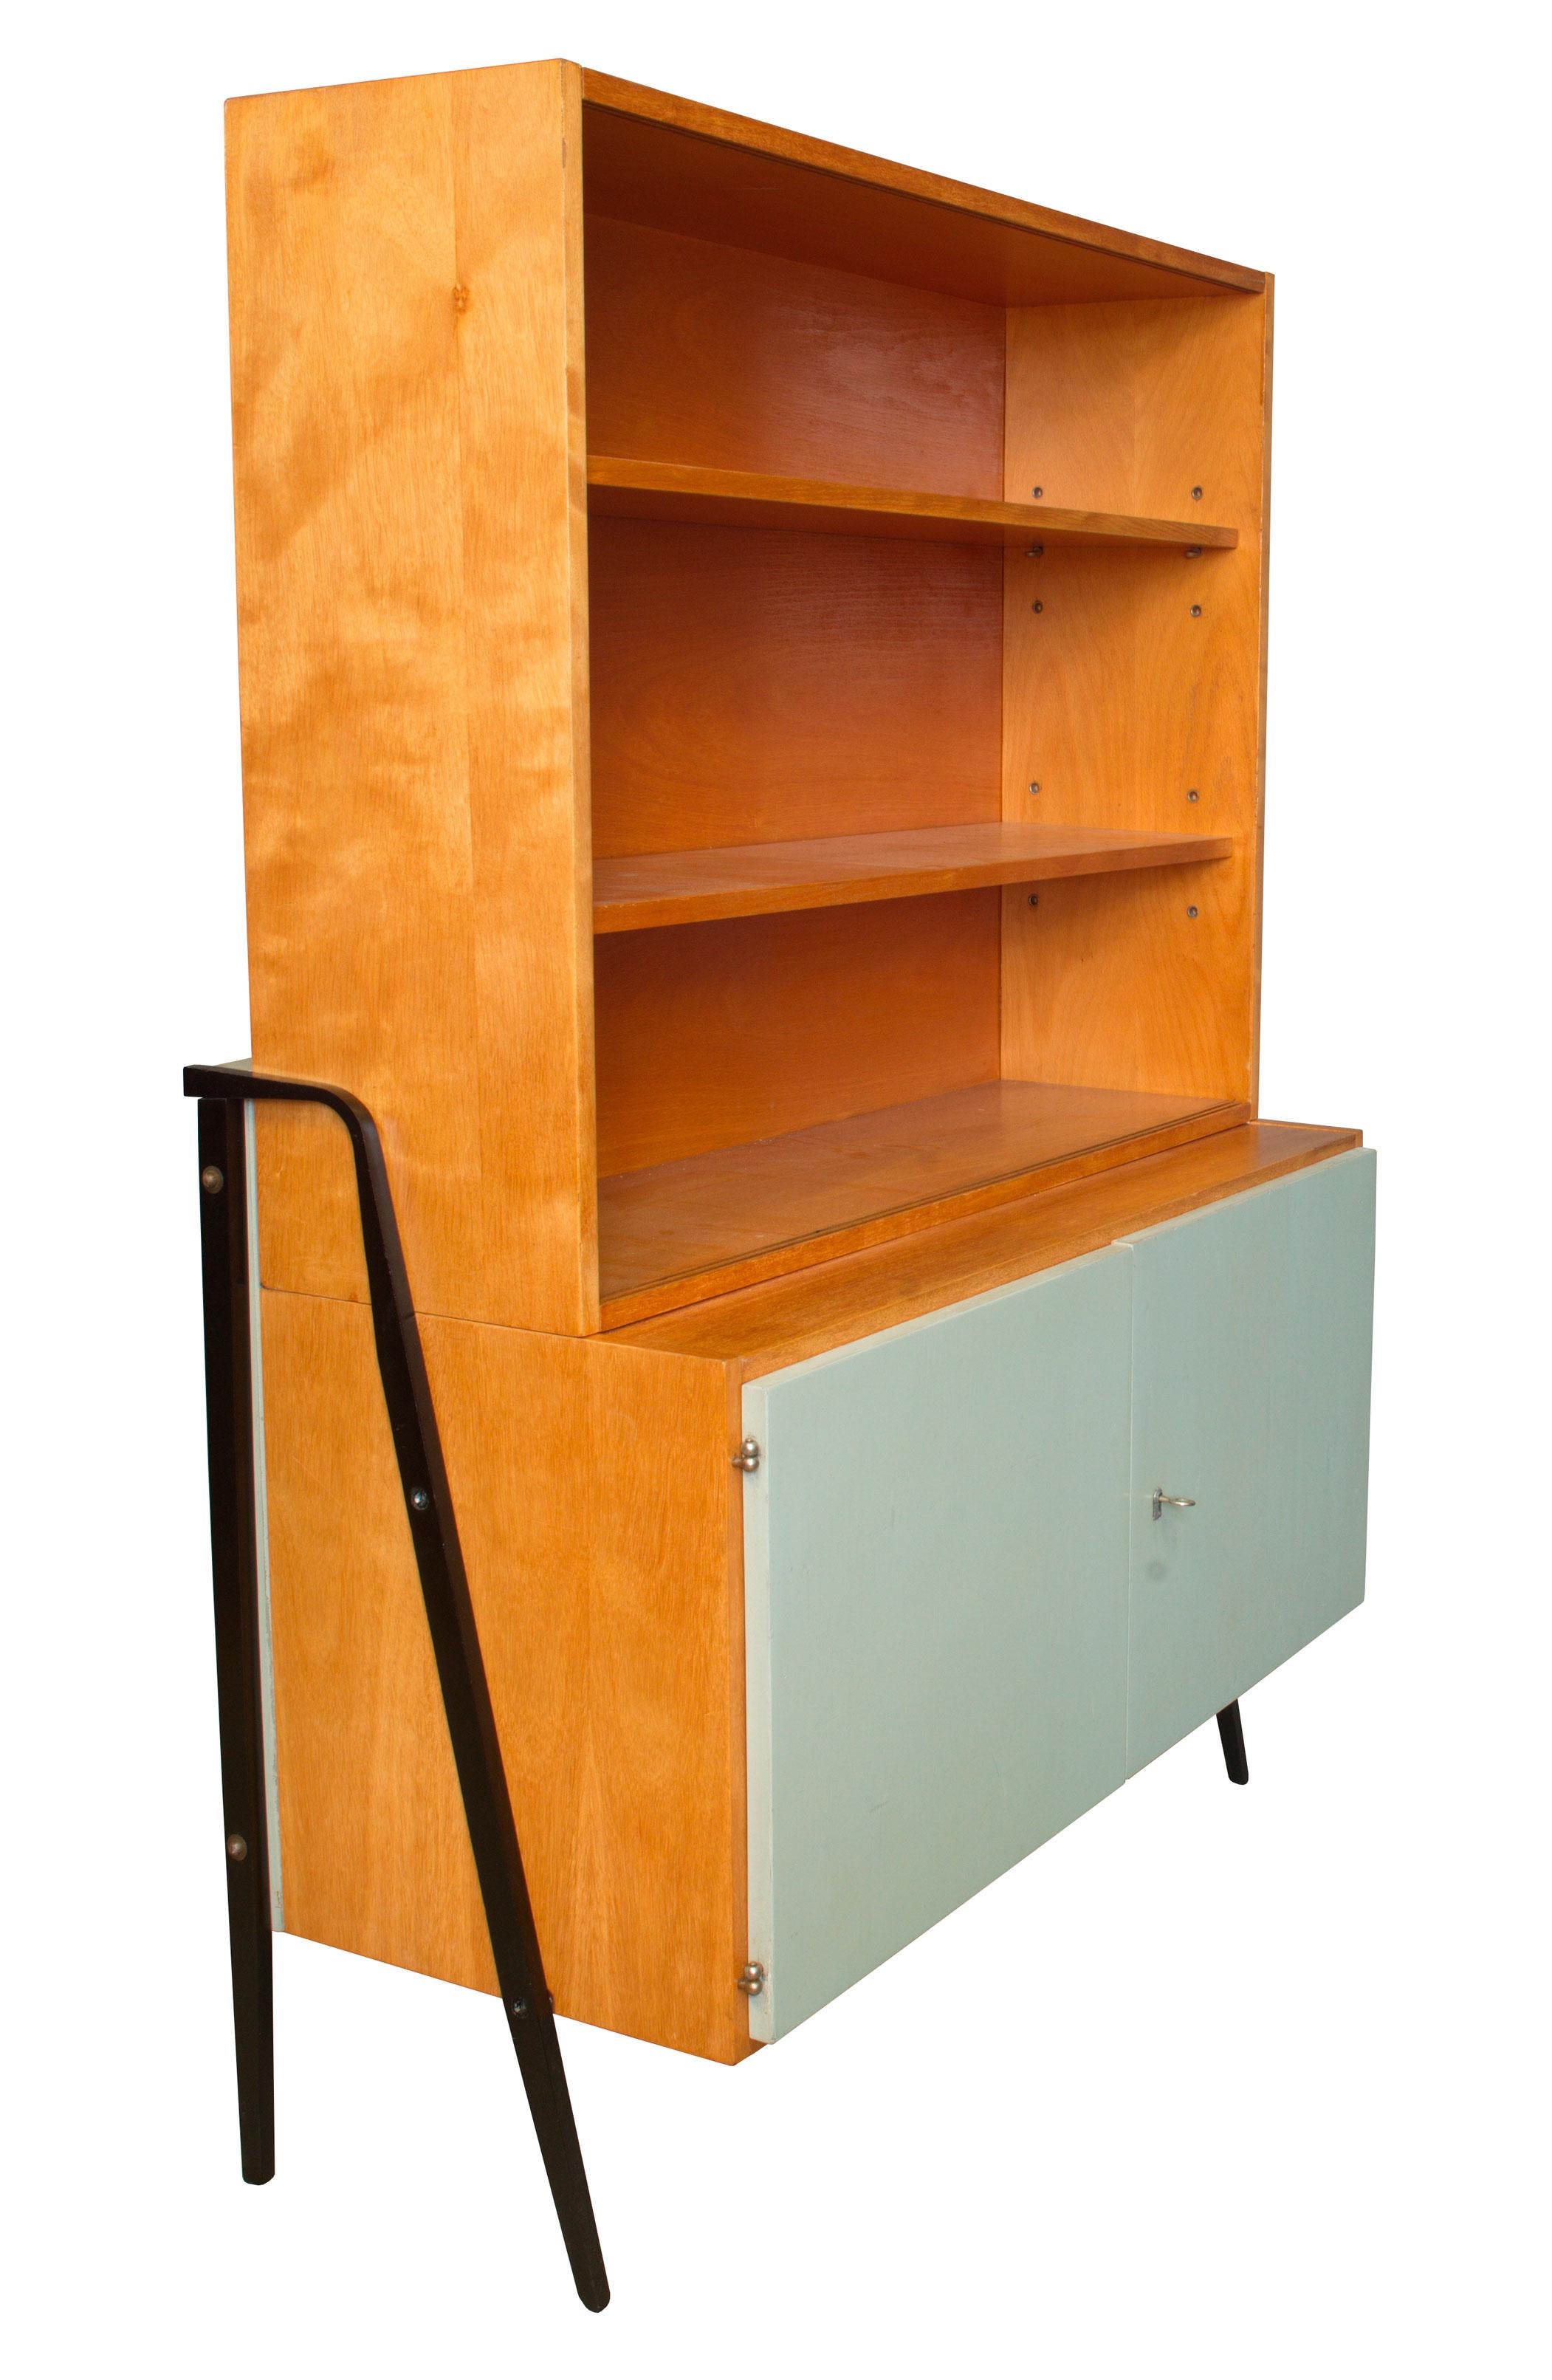 This Mid Century Cabinet has been designed and produced by UP Zavody in the 1960’s, in former Czechoslovakia. The cabinet is divided into two parts. The top part consists of open shelving protected by two sliding glass doors. The botom part has one